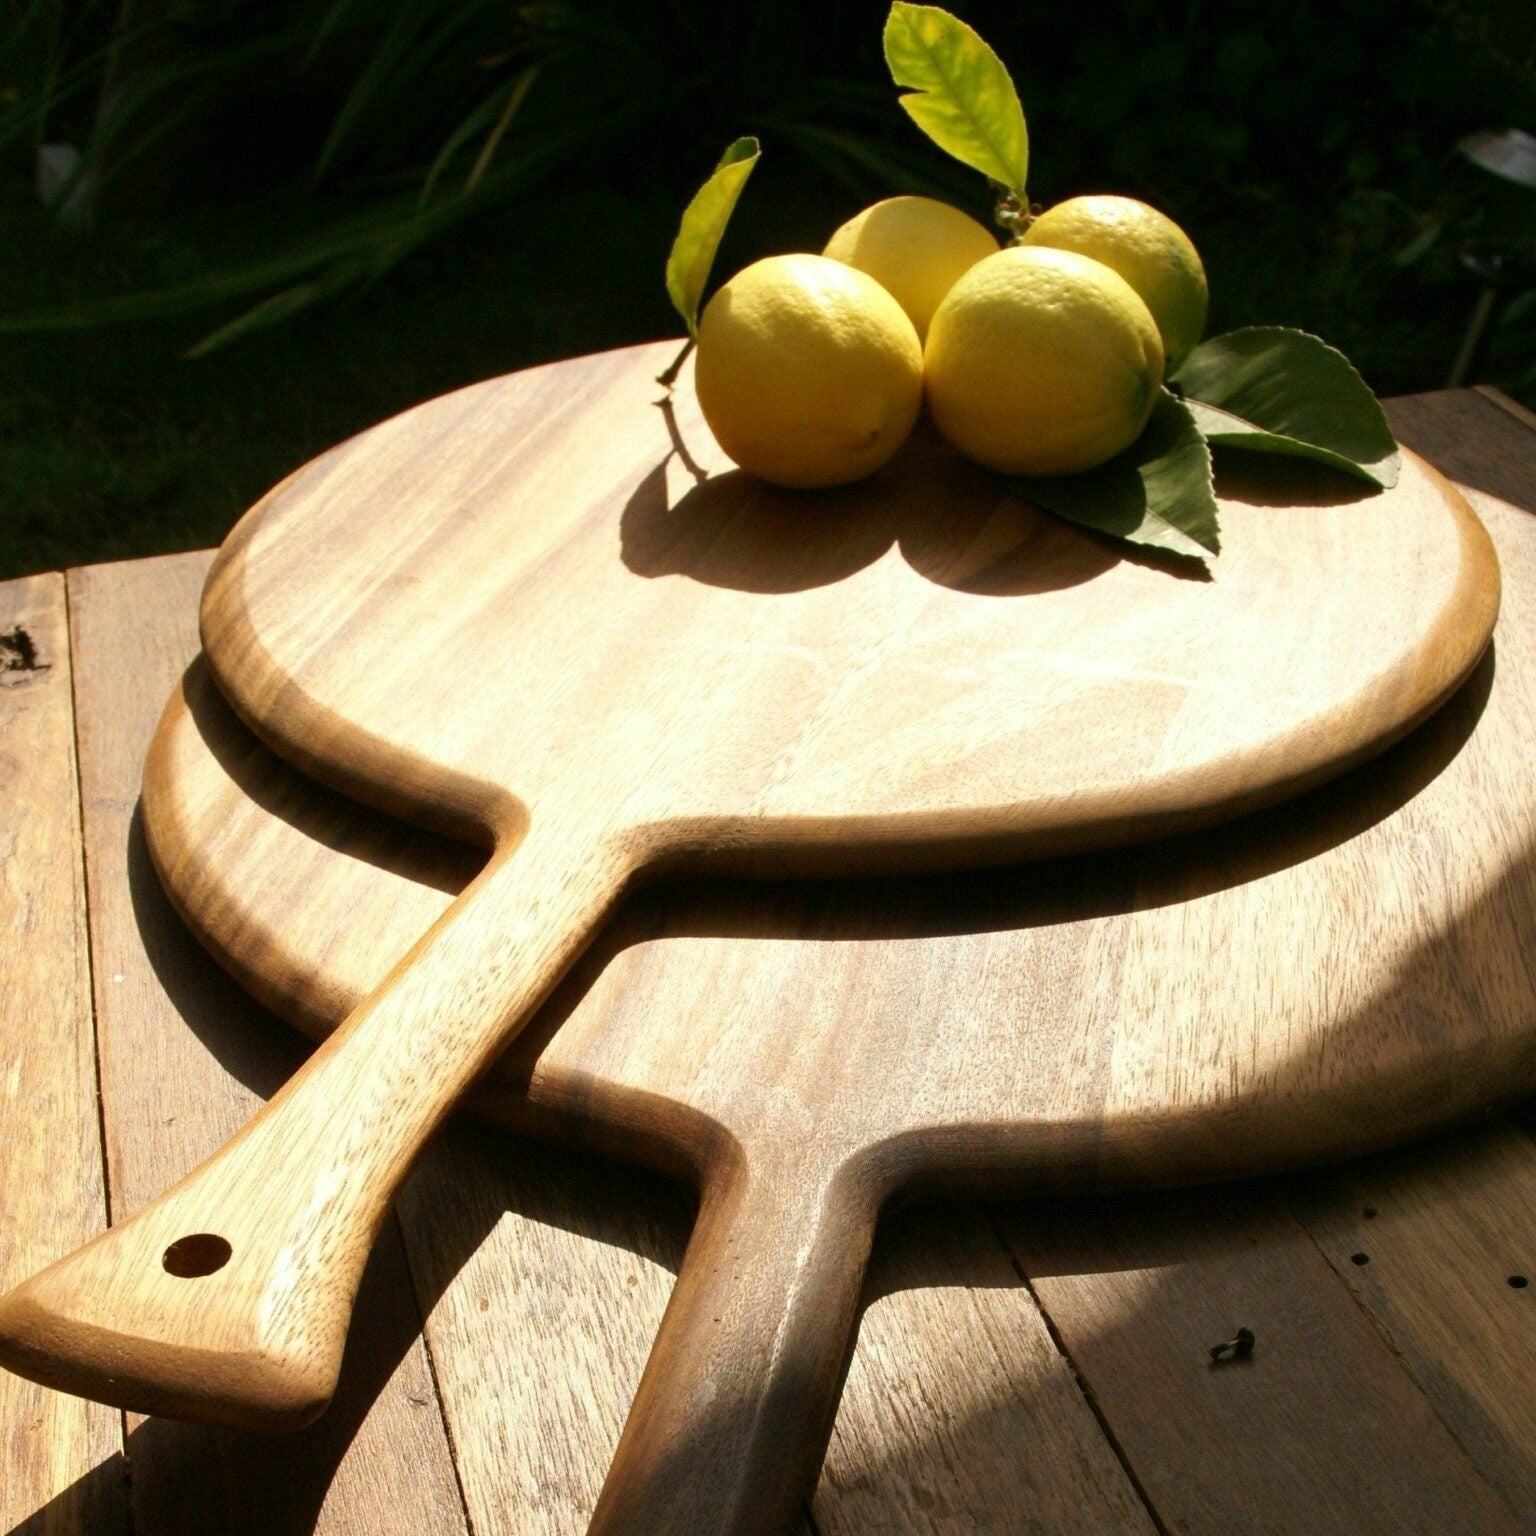 Acacia Round Board with Handle